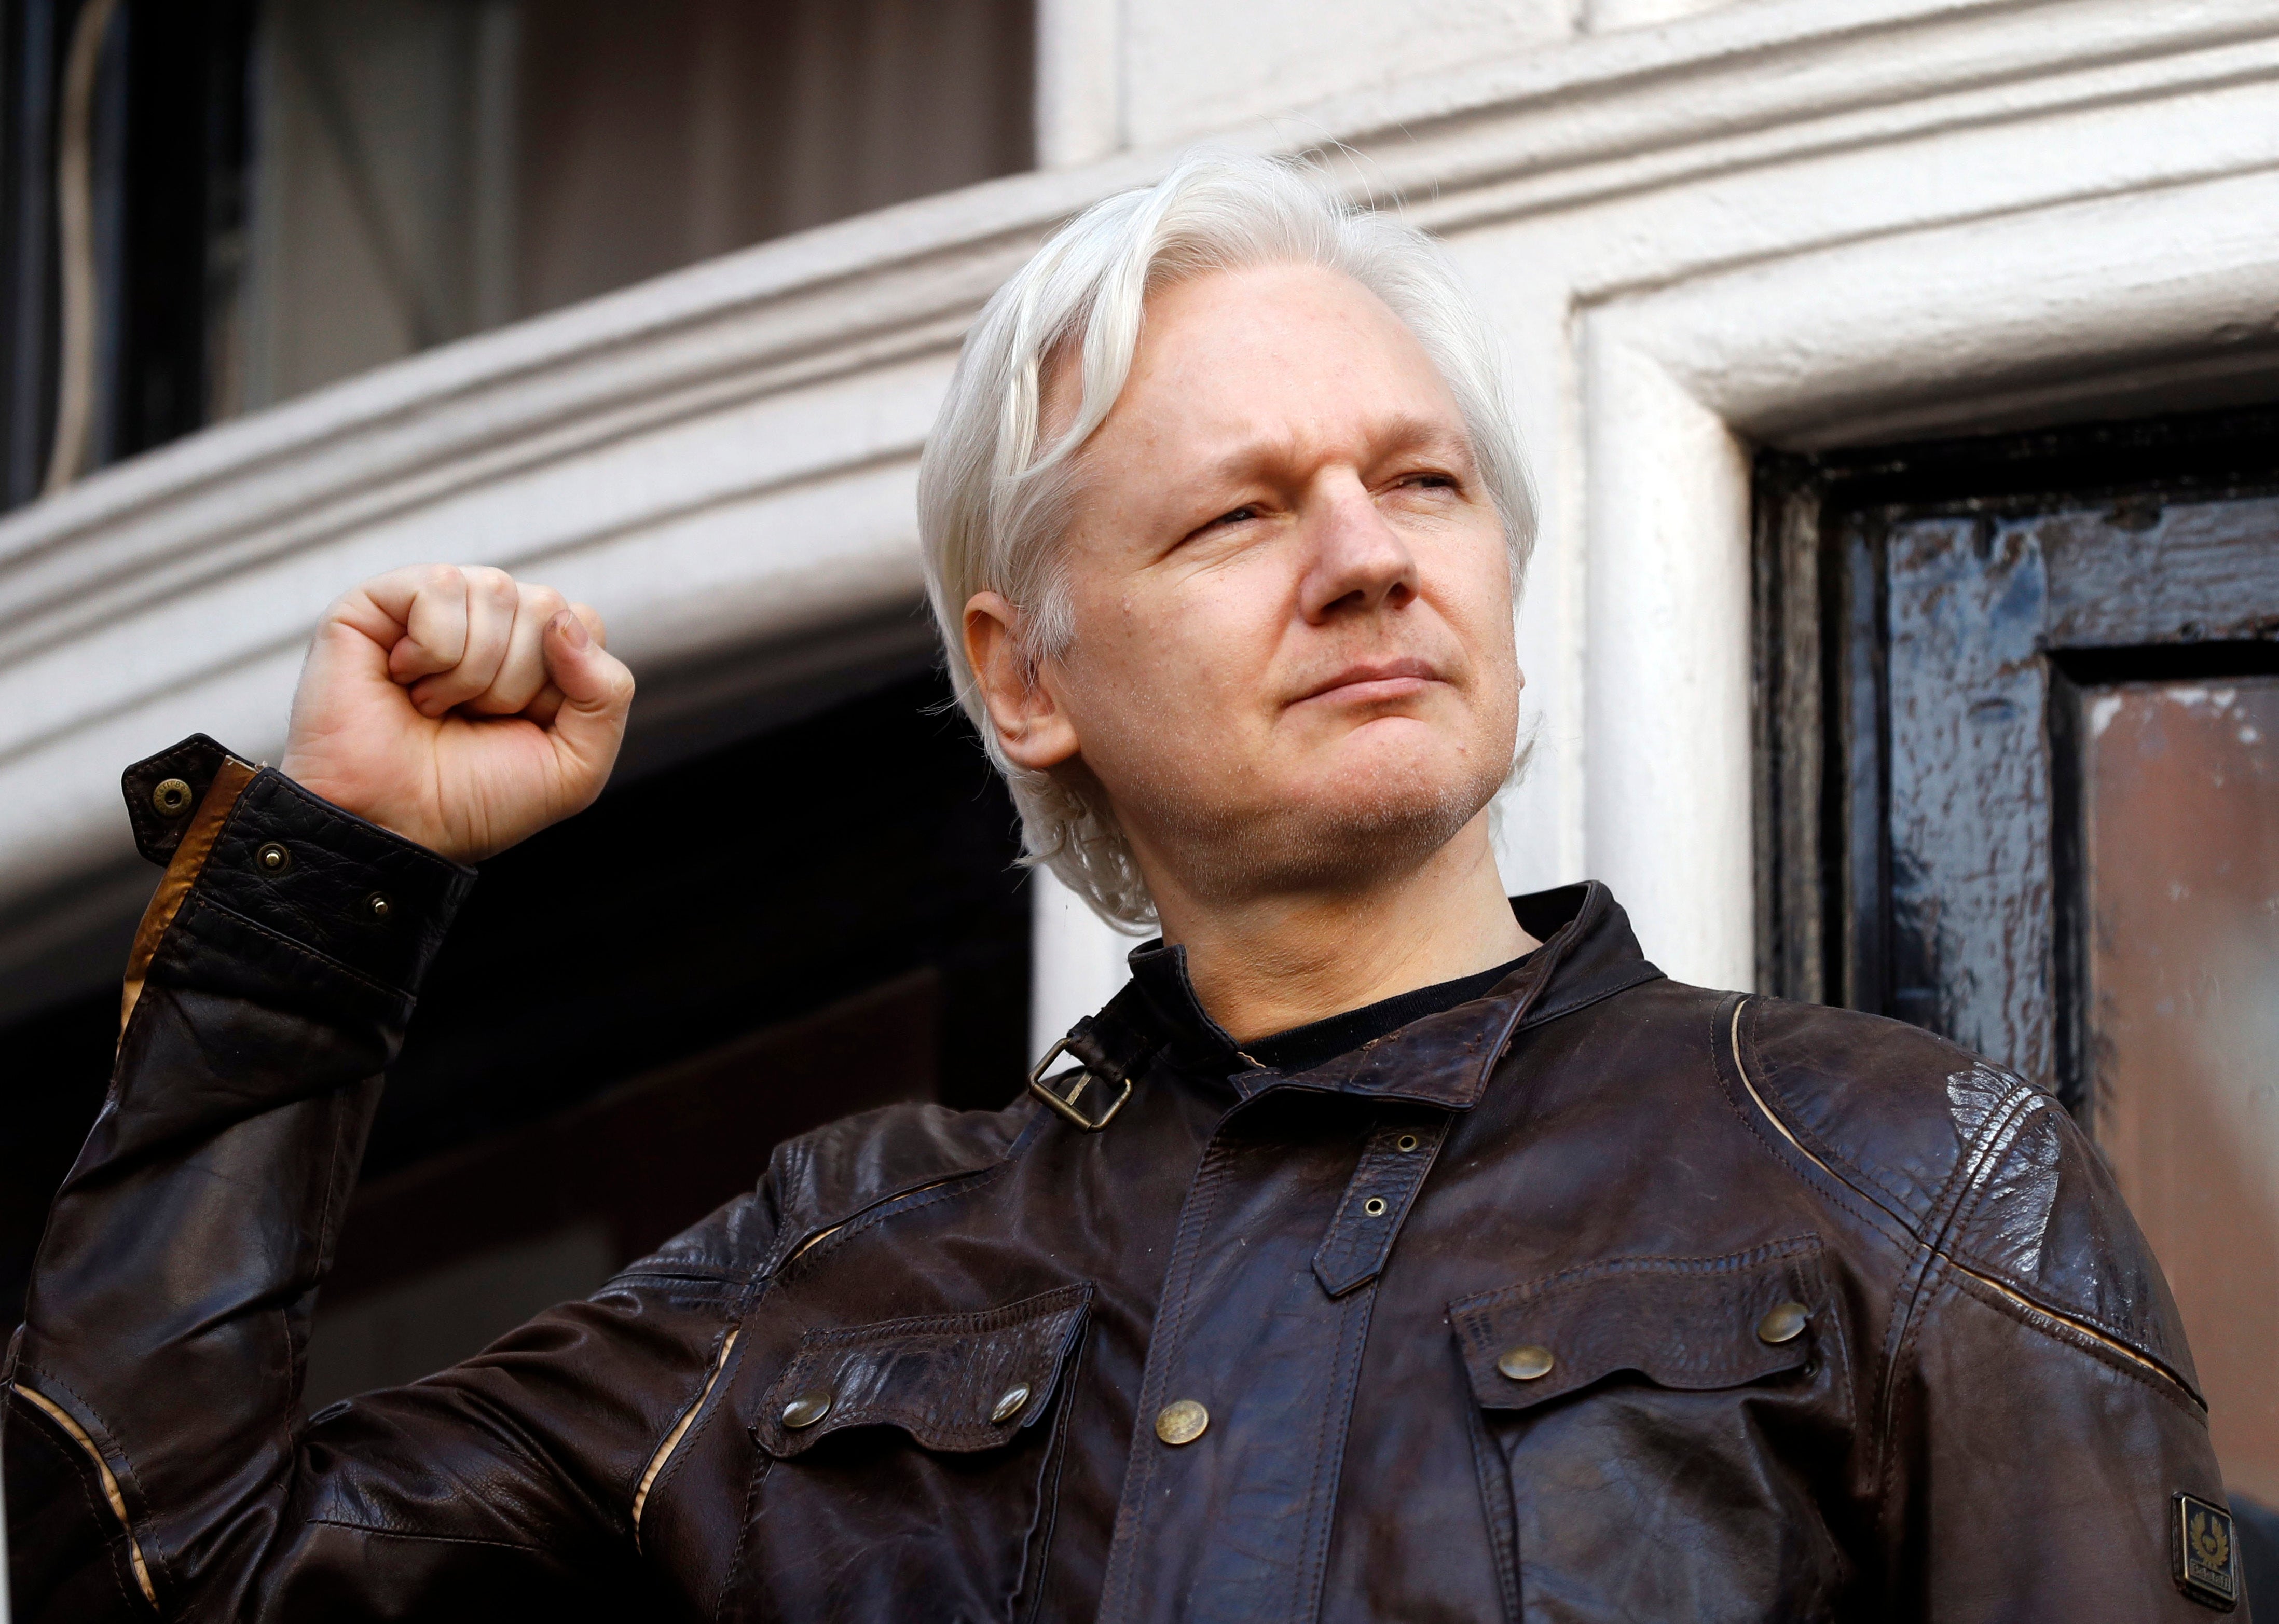 Julian Assange greets supporters outside the Ecuadorian embassy in London - where he remained for seven years while fighting extradition to Sweden and US